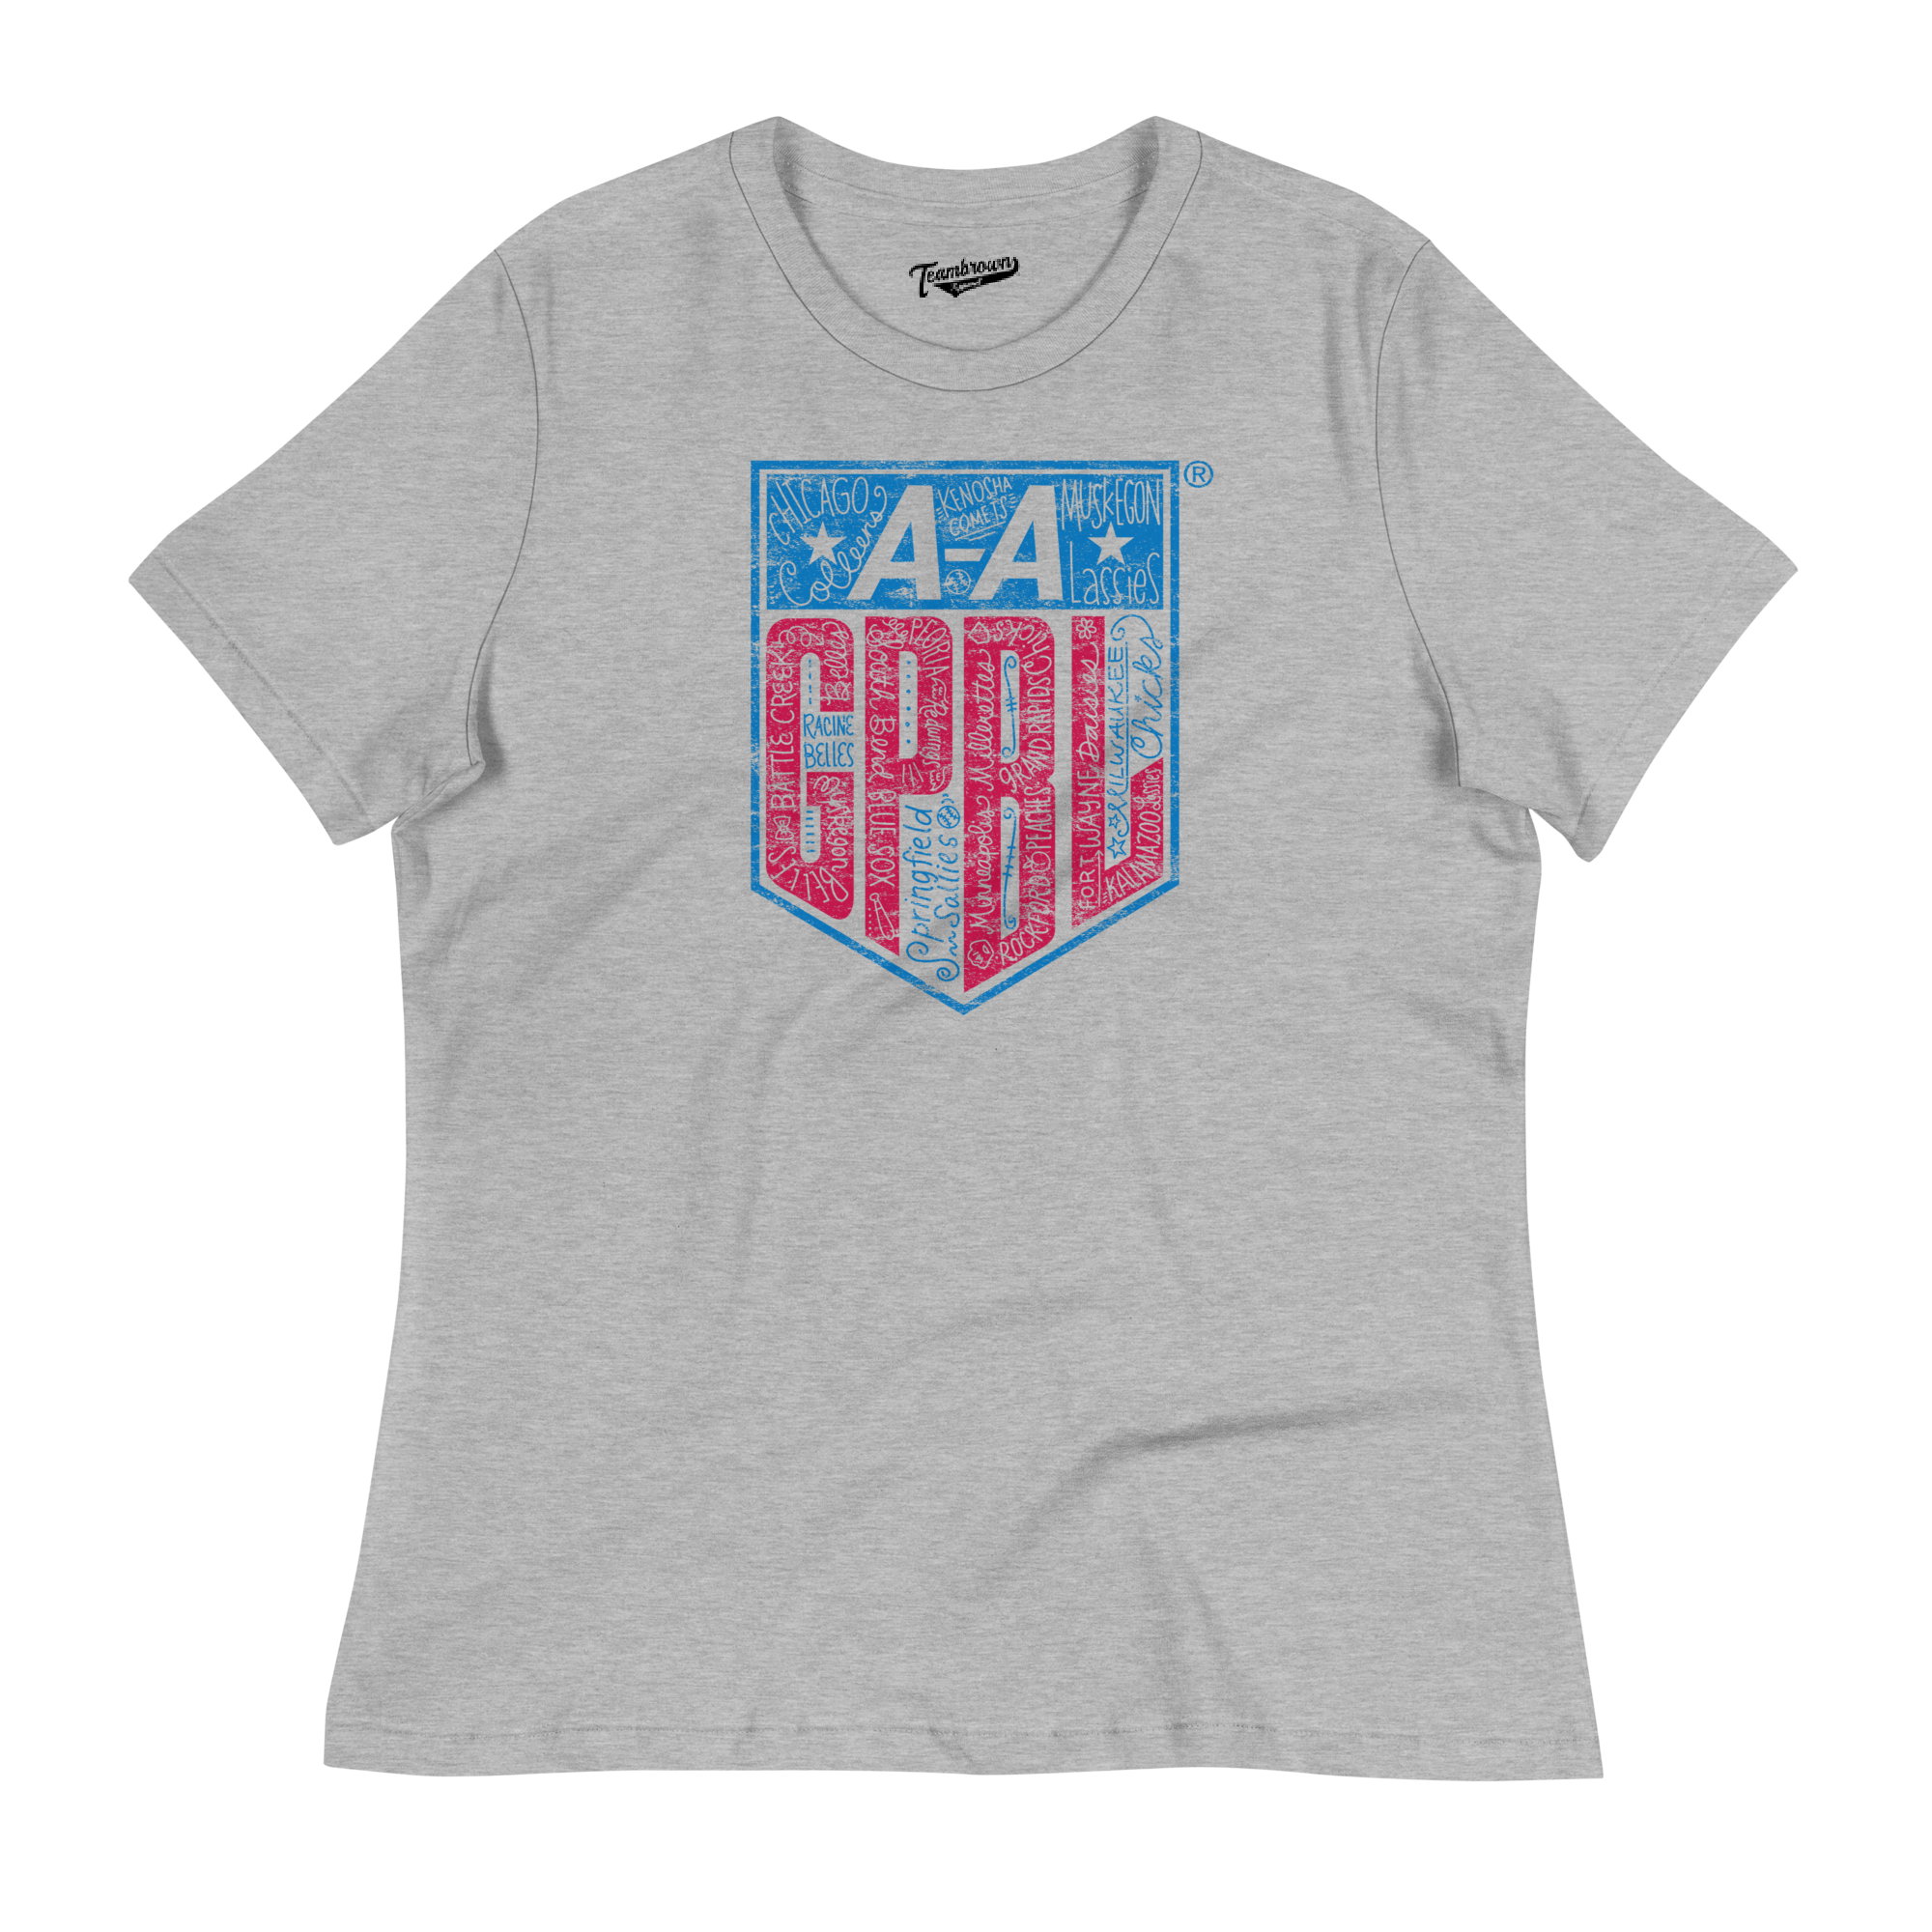 AAGPBL 1943-1954 - Women's Relaxed Fit T-Shirt | Officially Licensed - AAGPBL